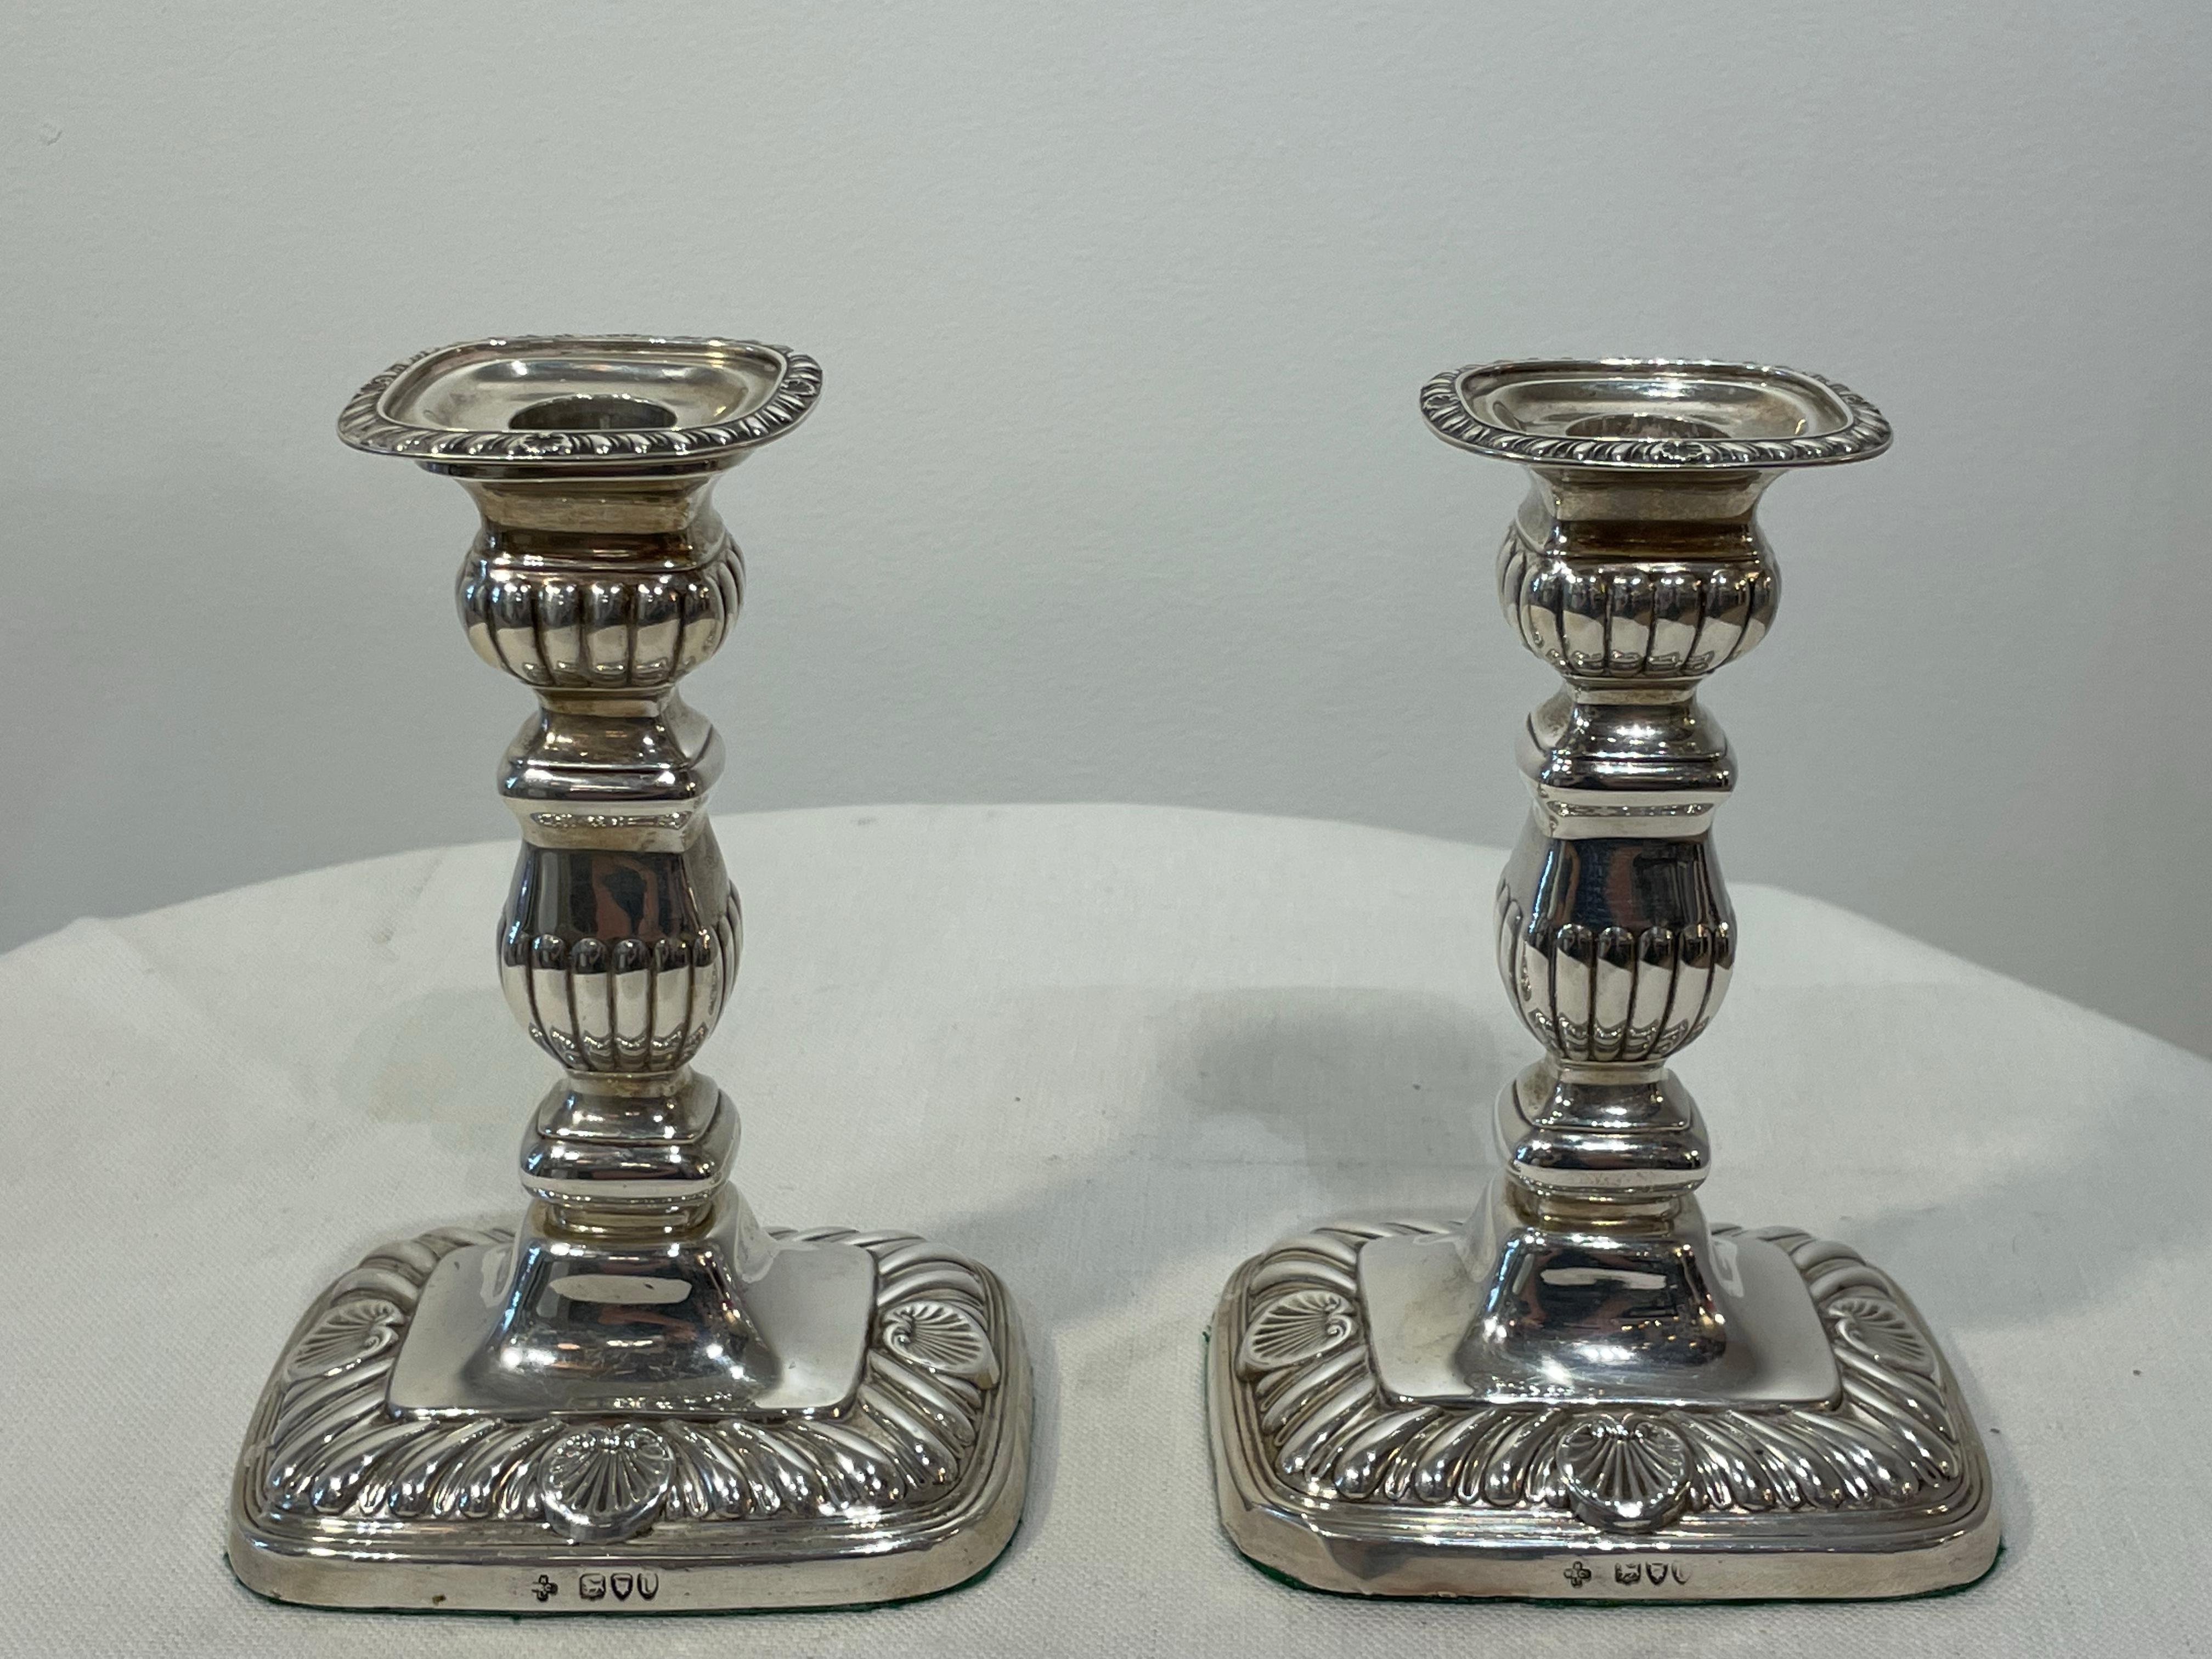 English silver chamber candlesticks in the Georgian style. Hallmarked and stamped. Late 19th century.